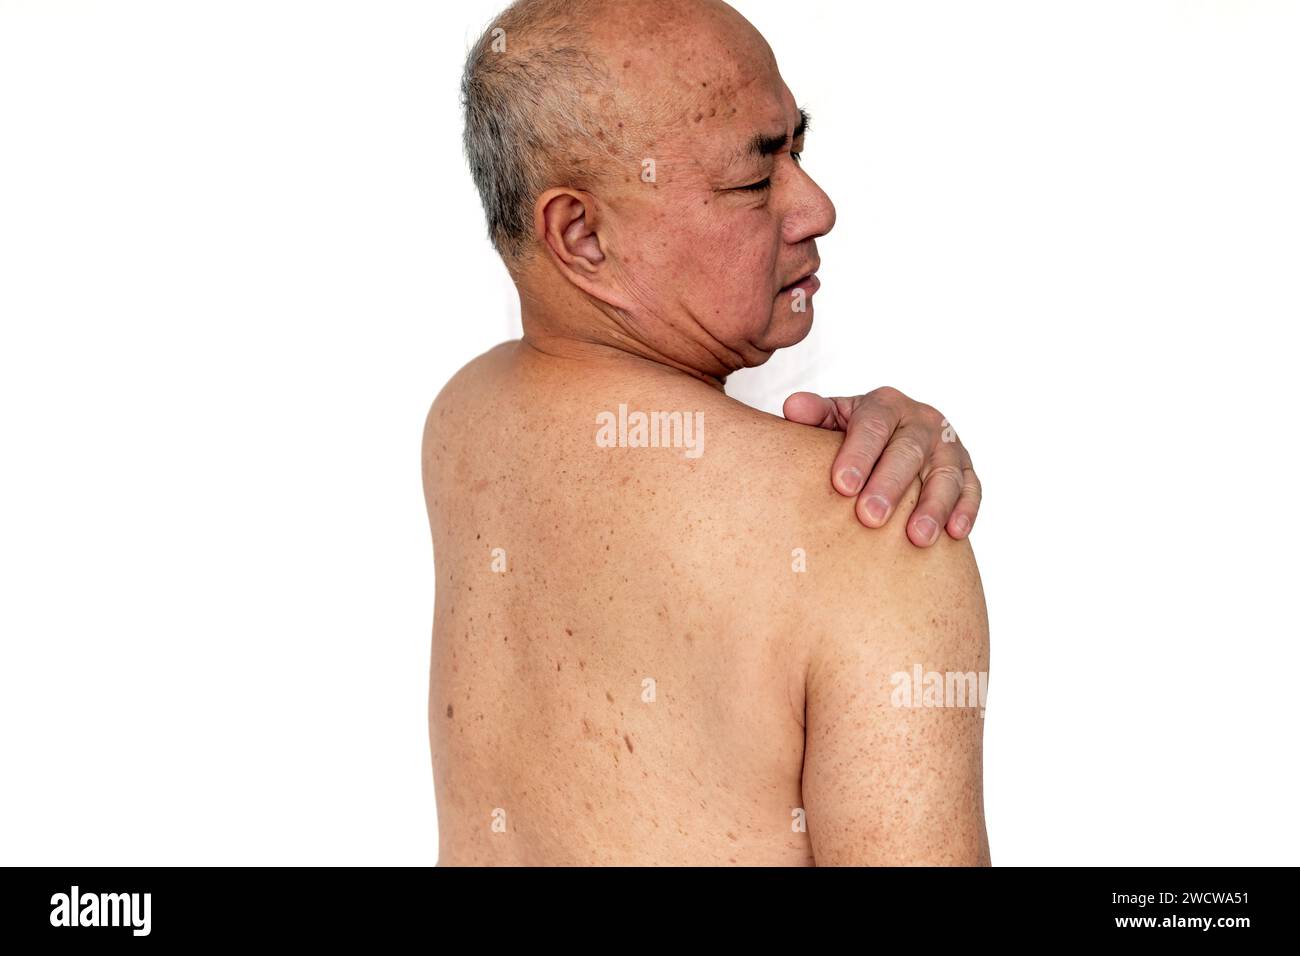 A senior man with a painful expression suffering from pain in the shoulder isolated in a white background Stock Photo